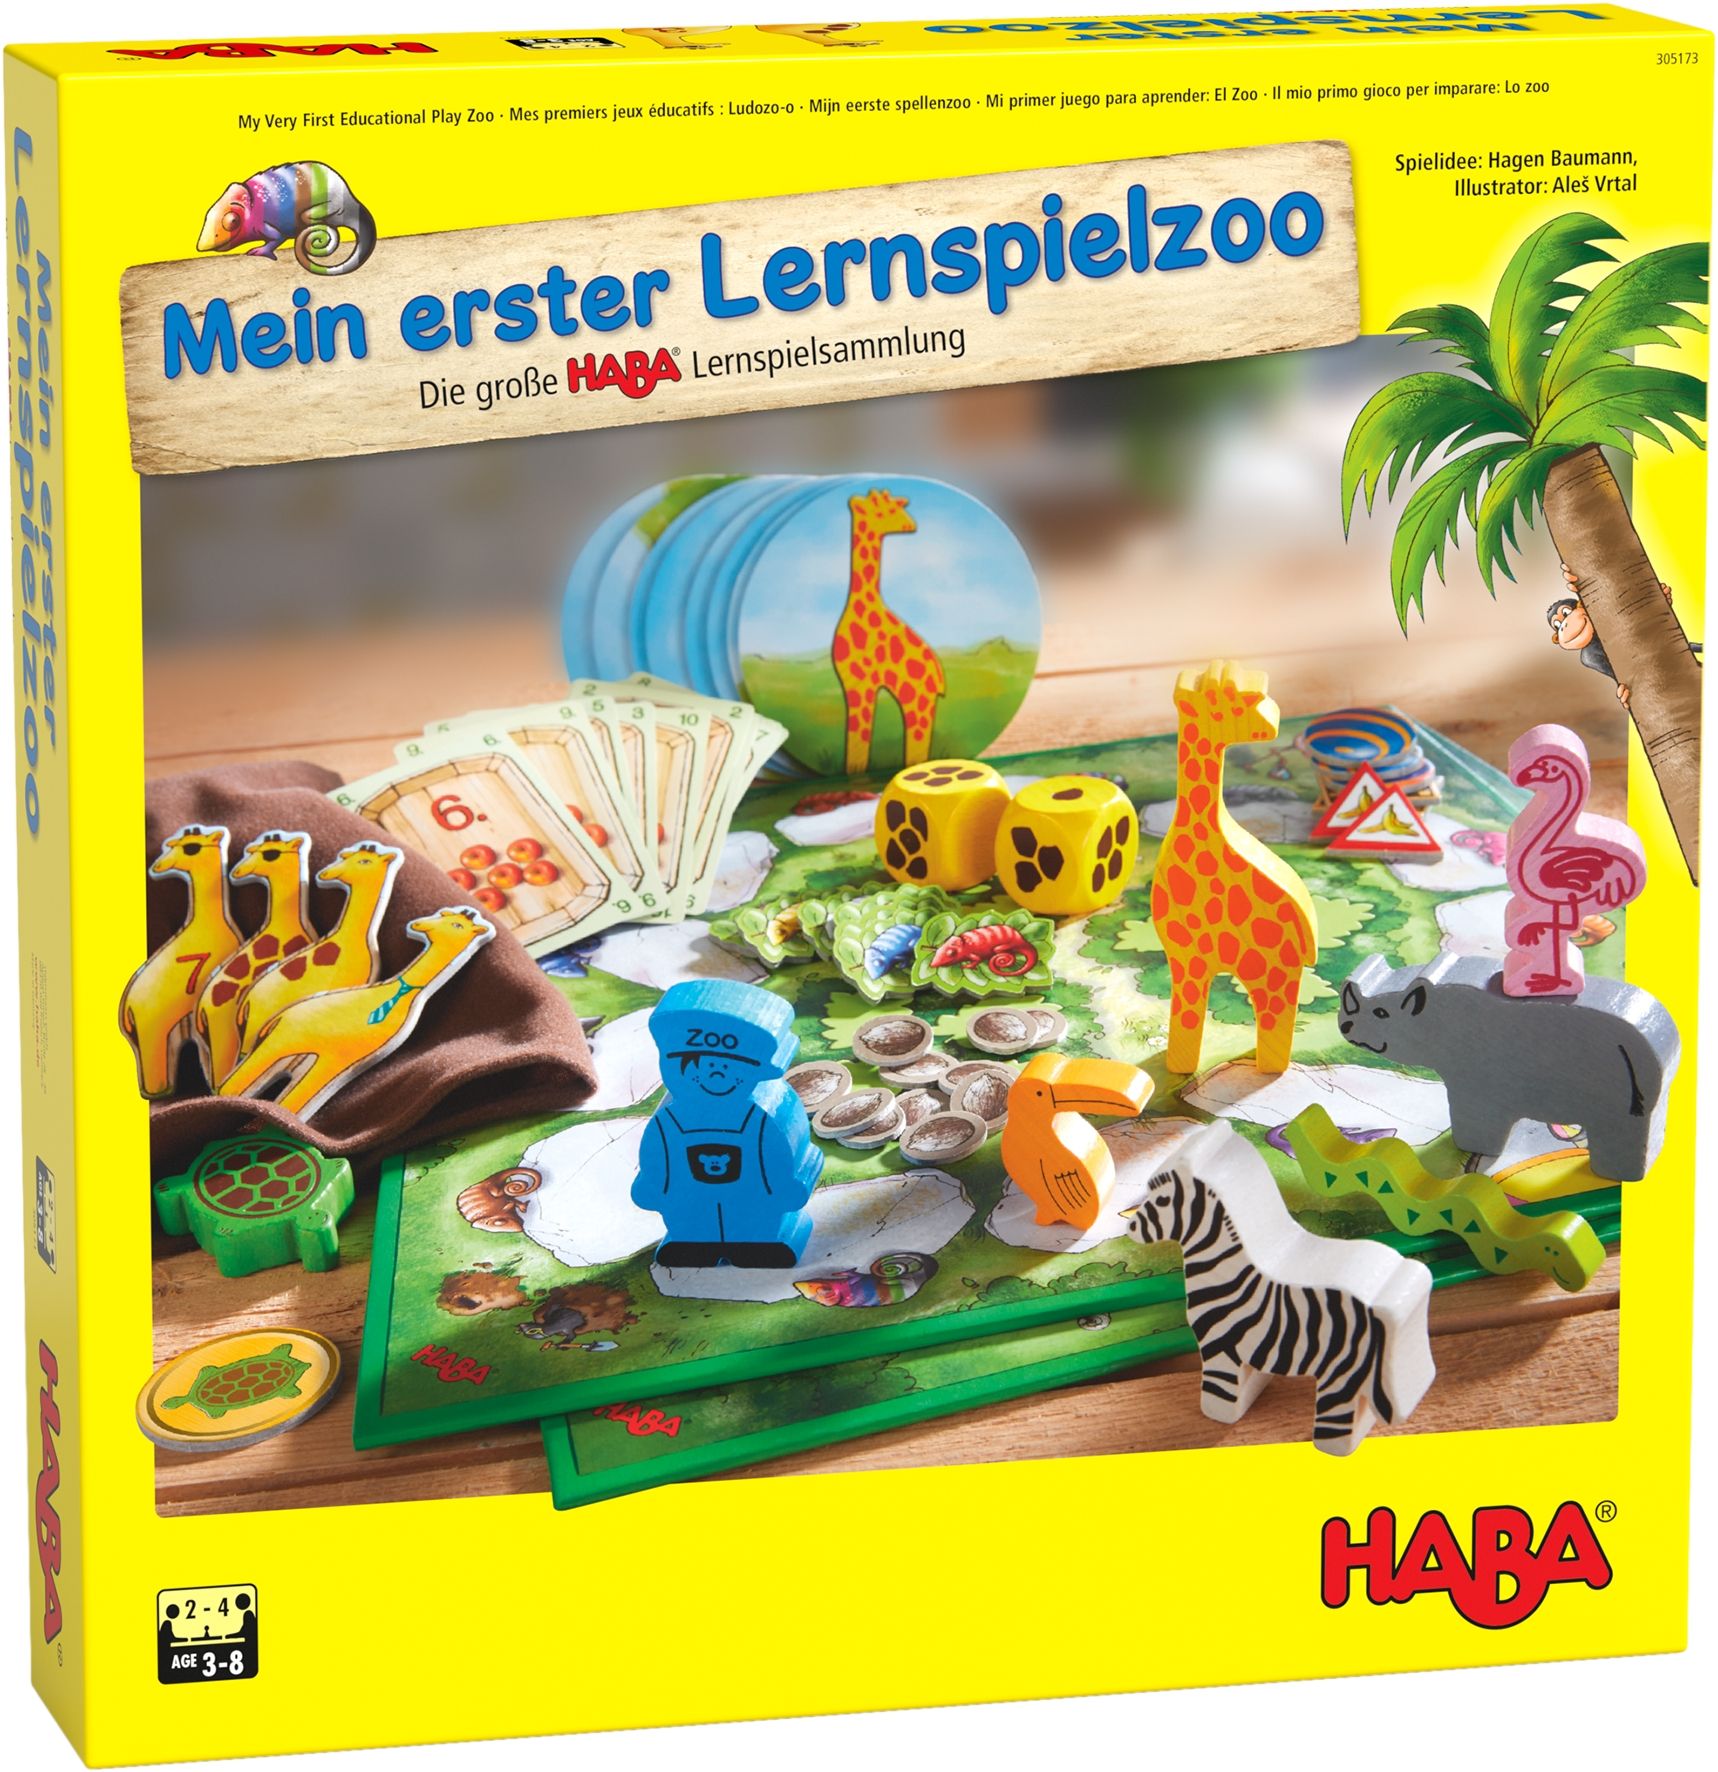 My Very First Educational Play Zoo - Mein erster Lernspielzoo